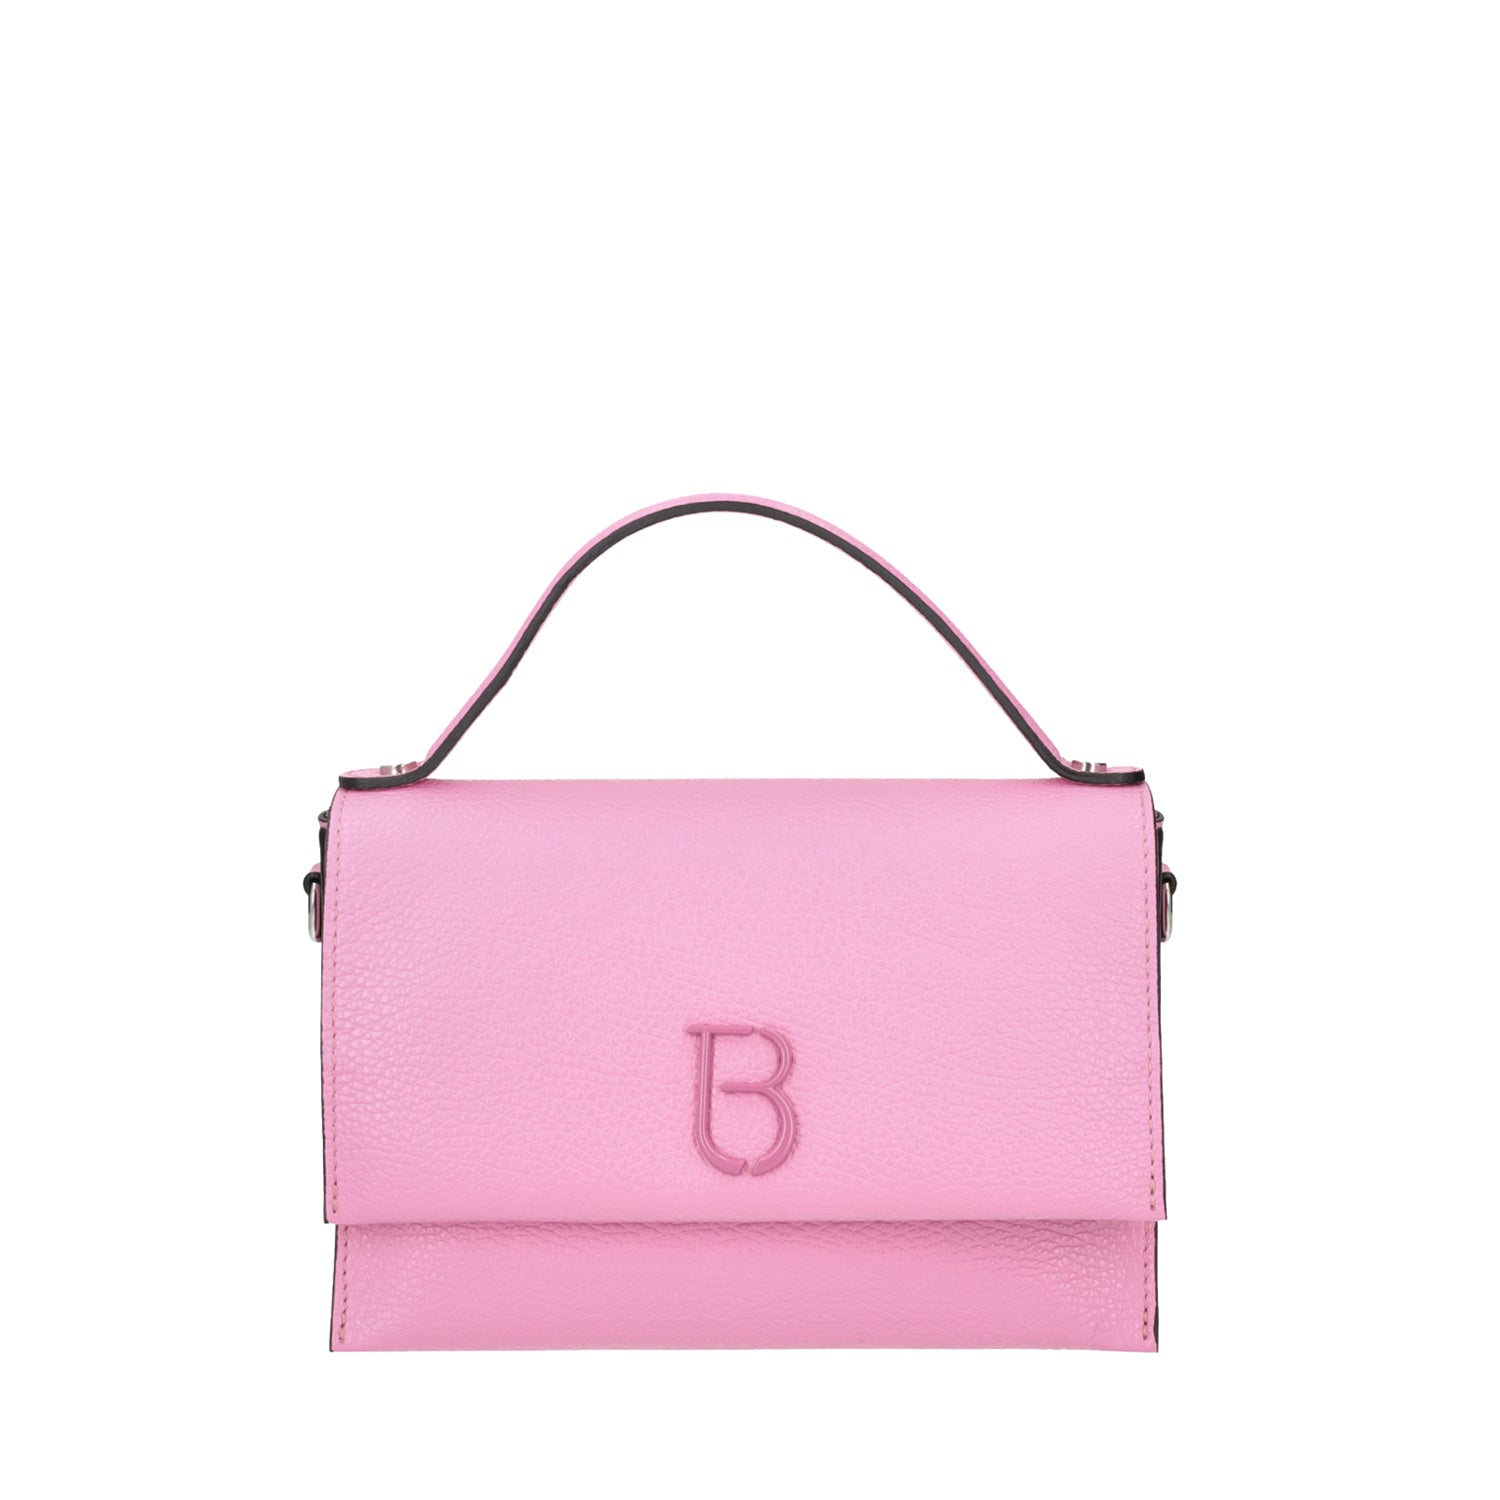 PINK NARCISO HAND BAG IN LEATHER WITH SHOULDER STRAP